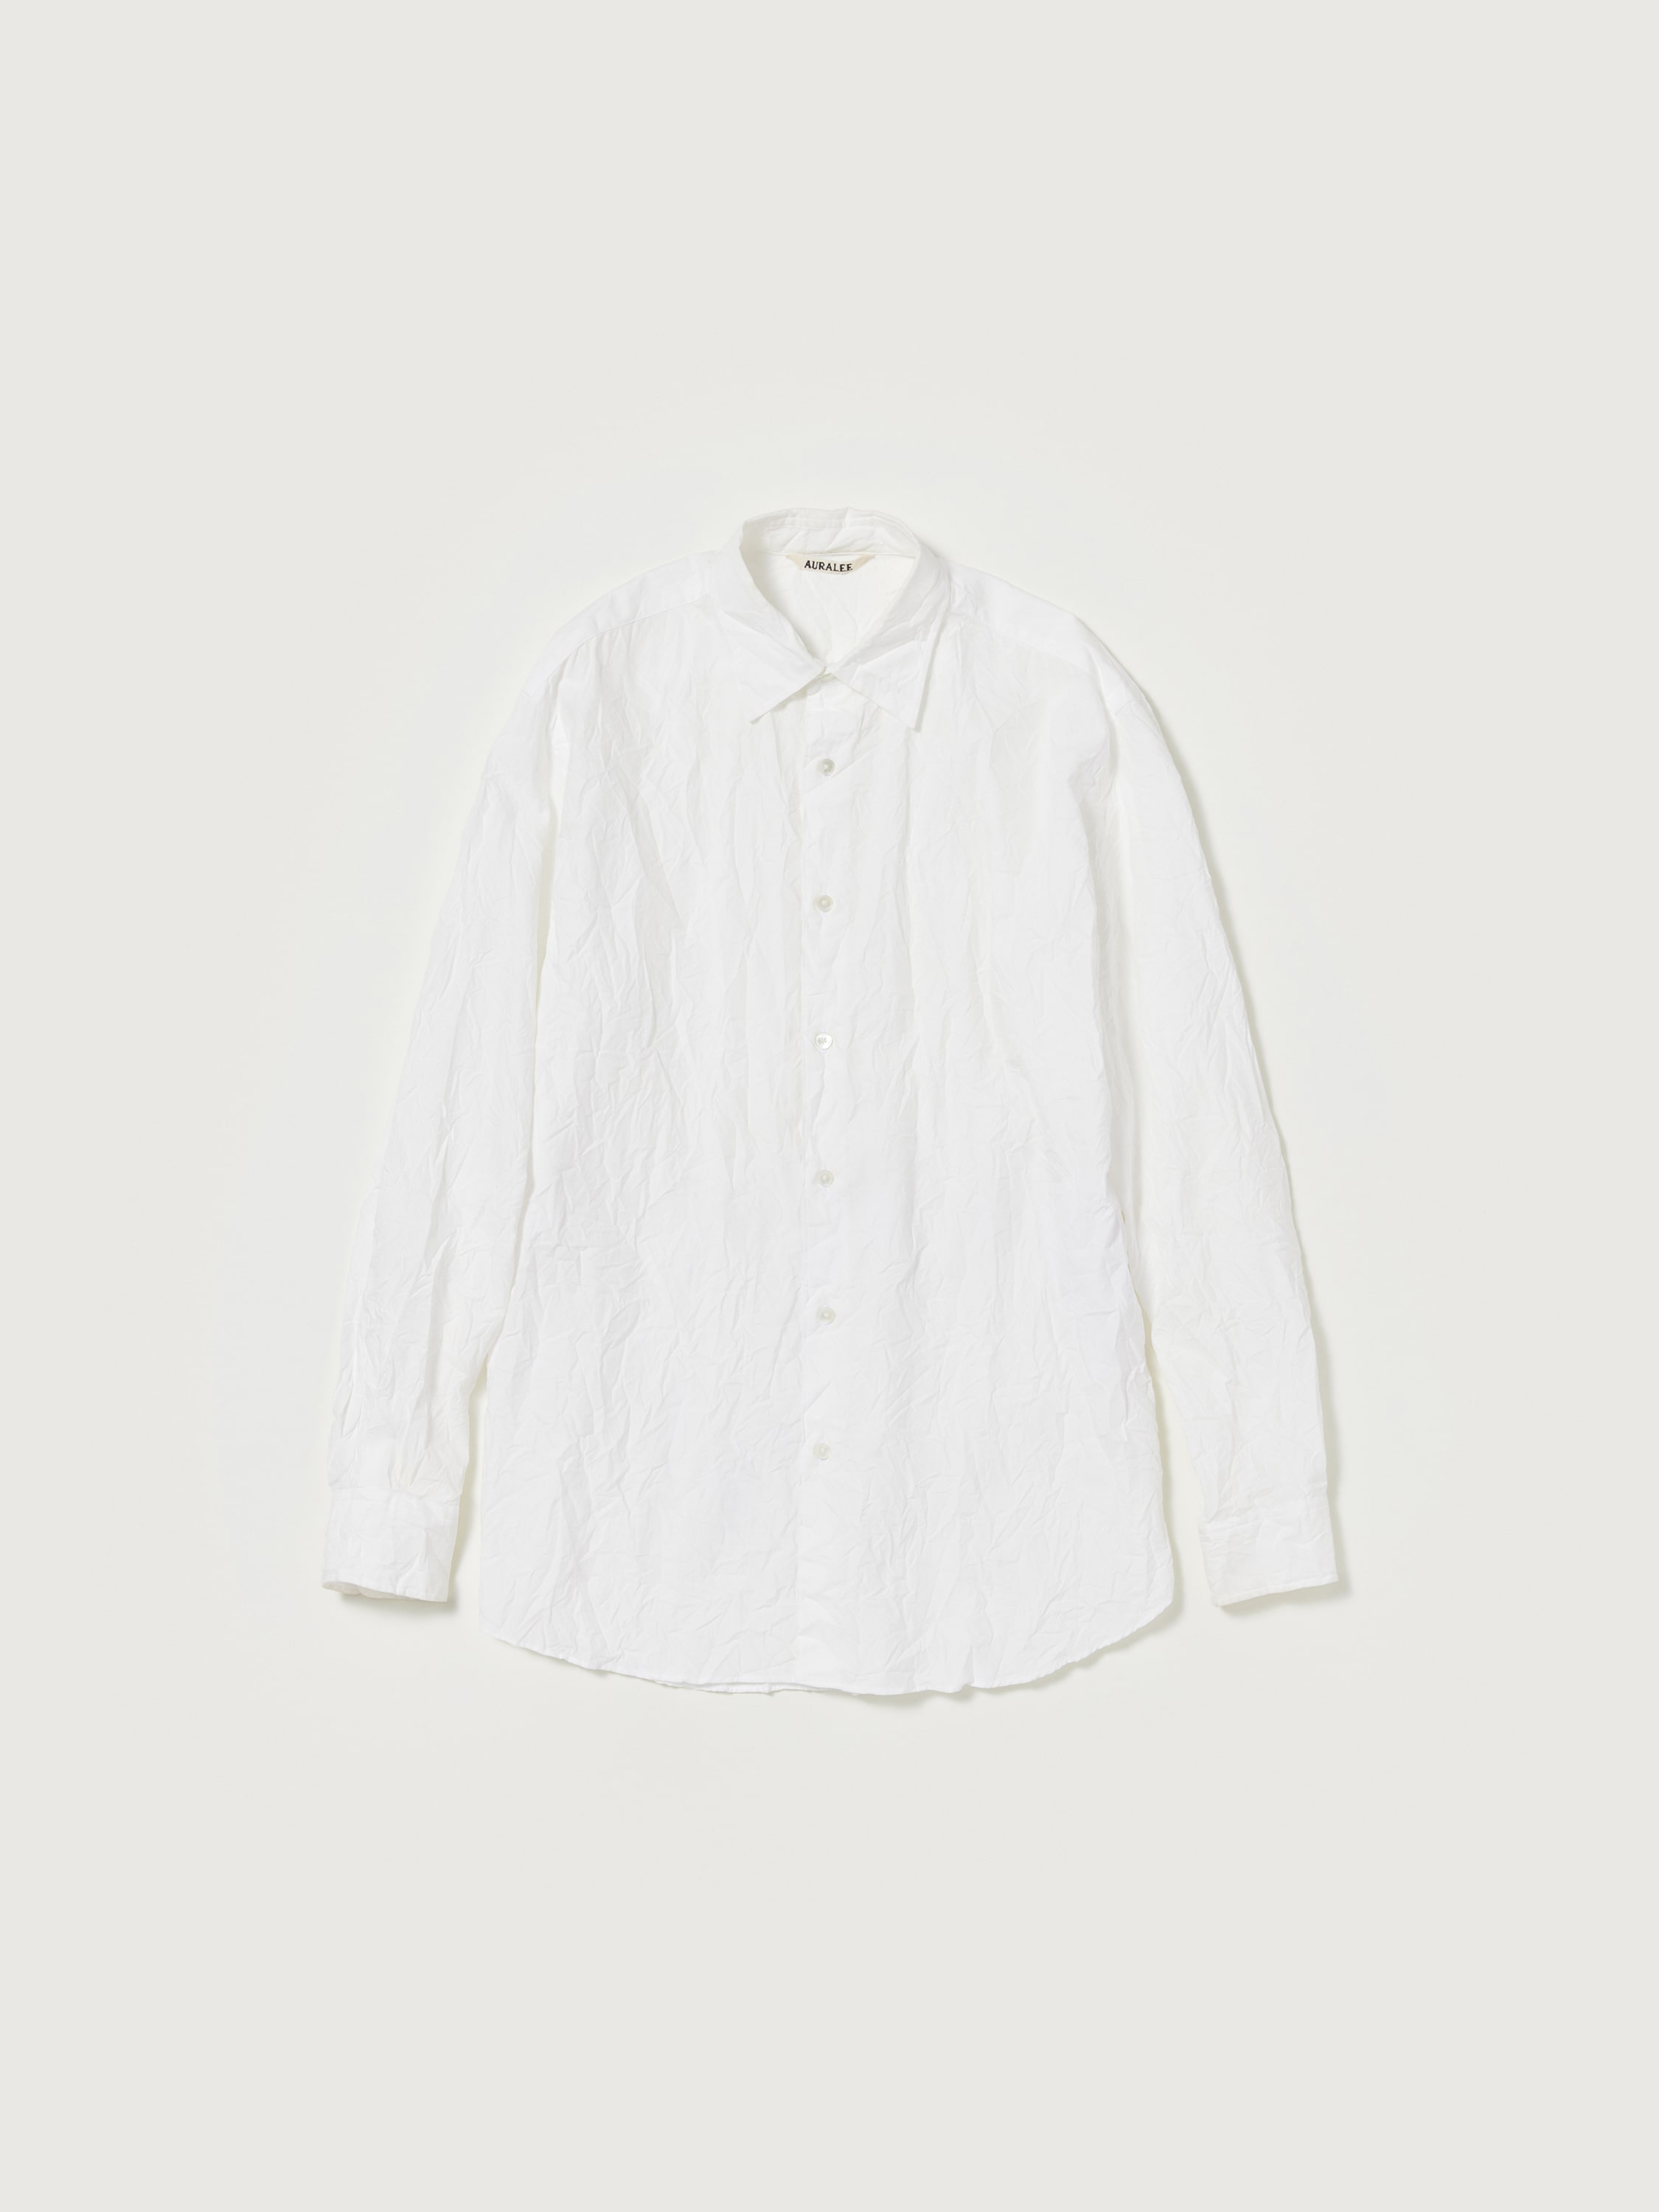 WRINKLED WASHED FINX TWILL SHIRT 詳細画像 WHITE 1